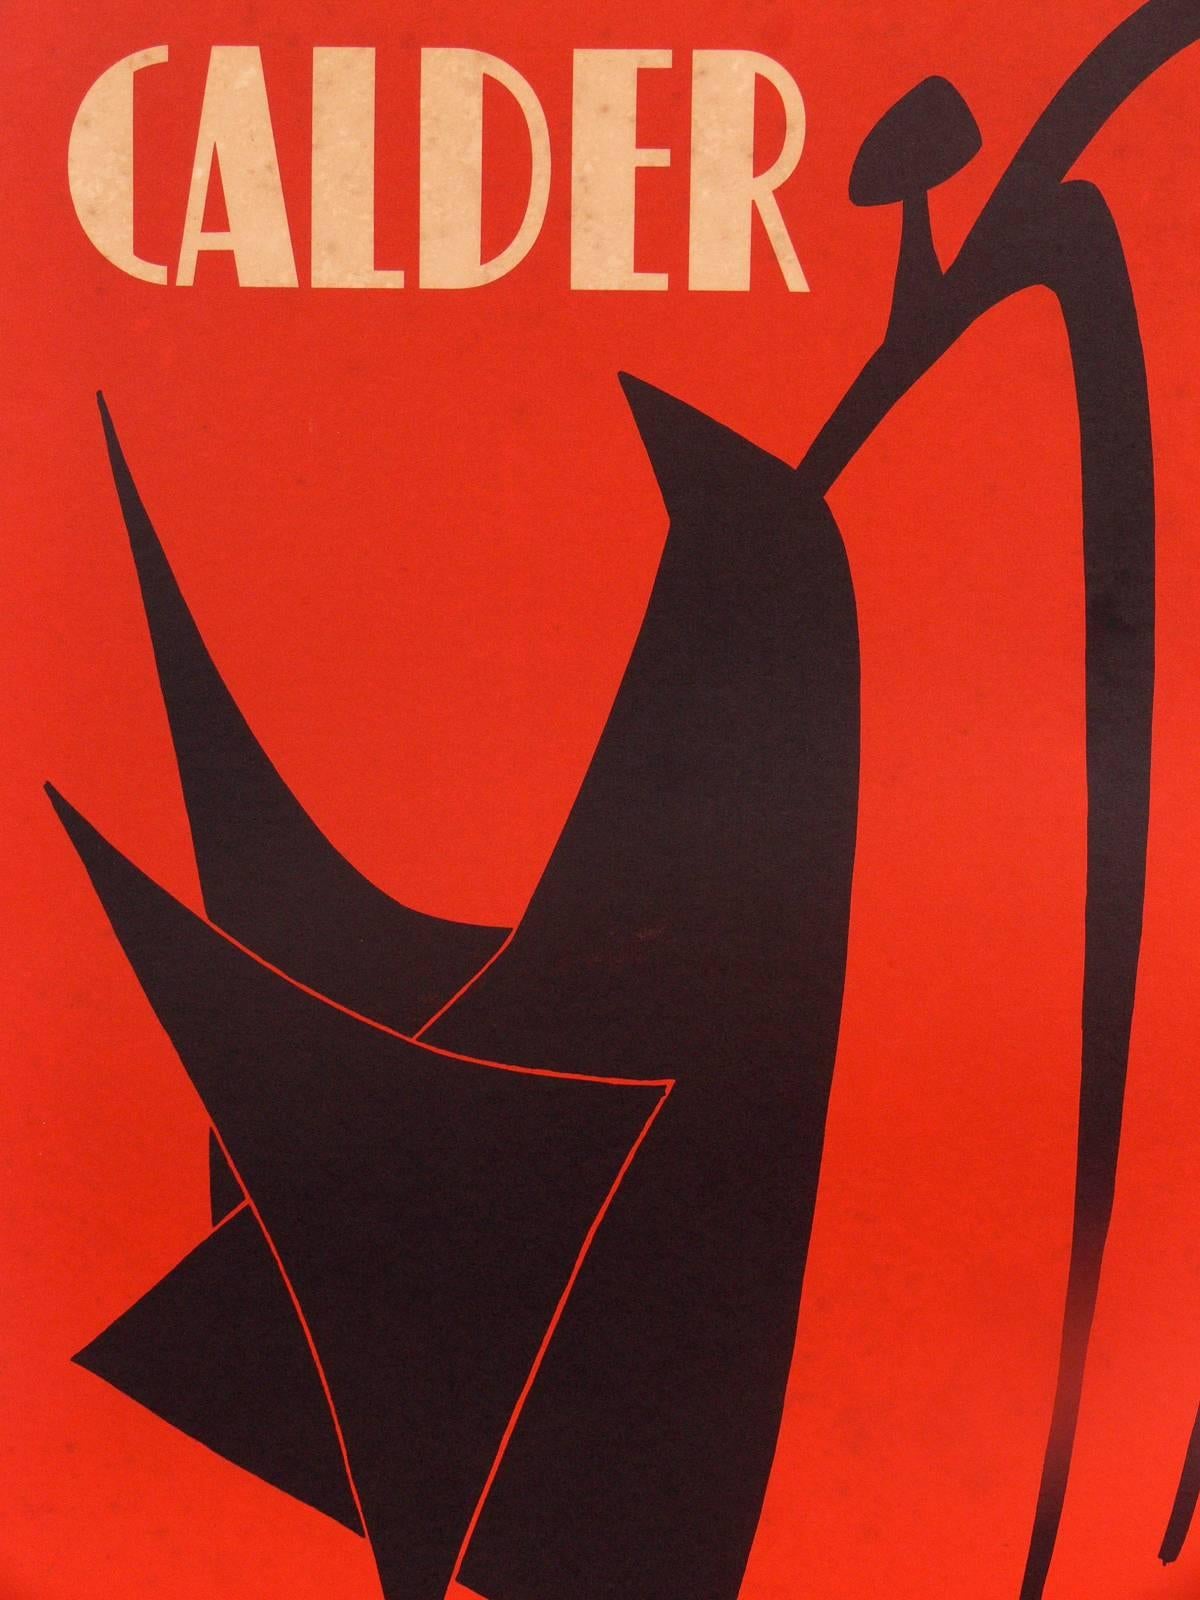 Group of modernist color lithographs, circa 1950s. 
From left to right, they are:
1) Alexander Calder, color lithograph produced by Mourlot, from an exhibition at Galerie Maeght, circa 1950s. It measures 27.25